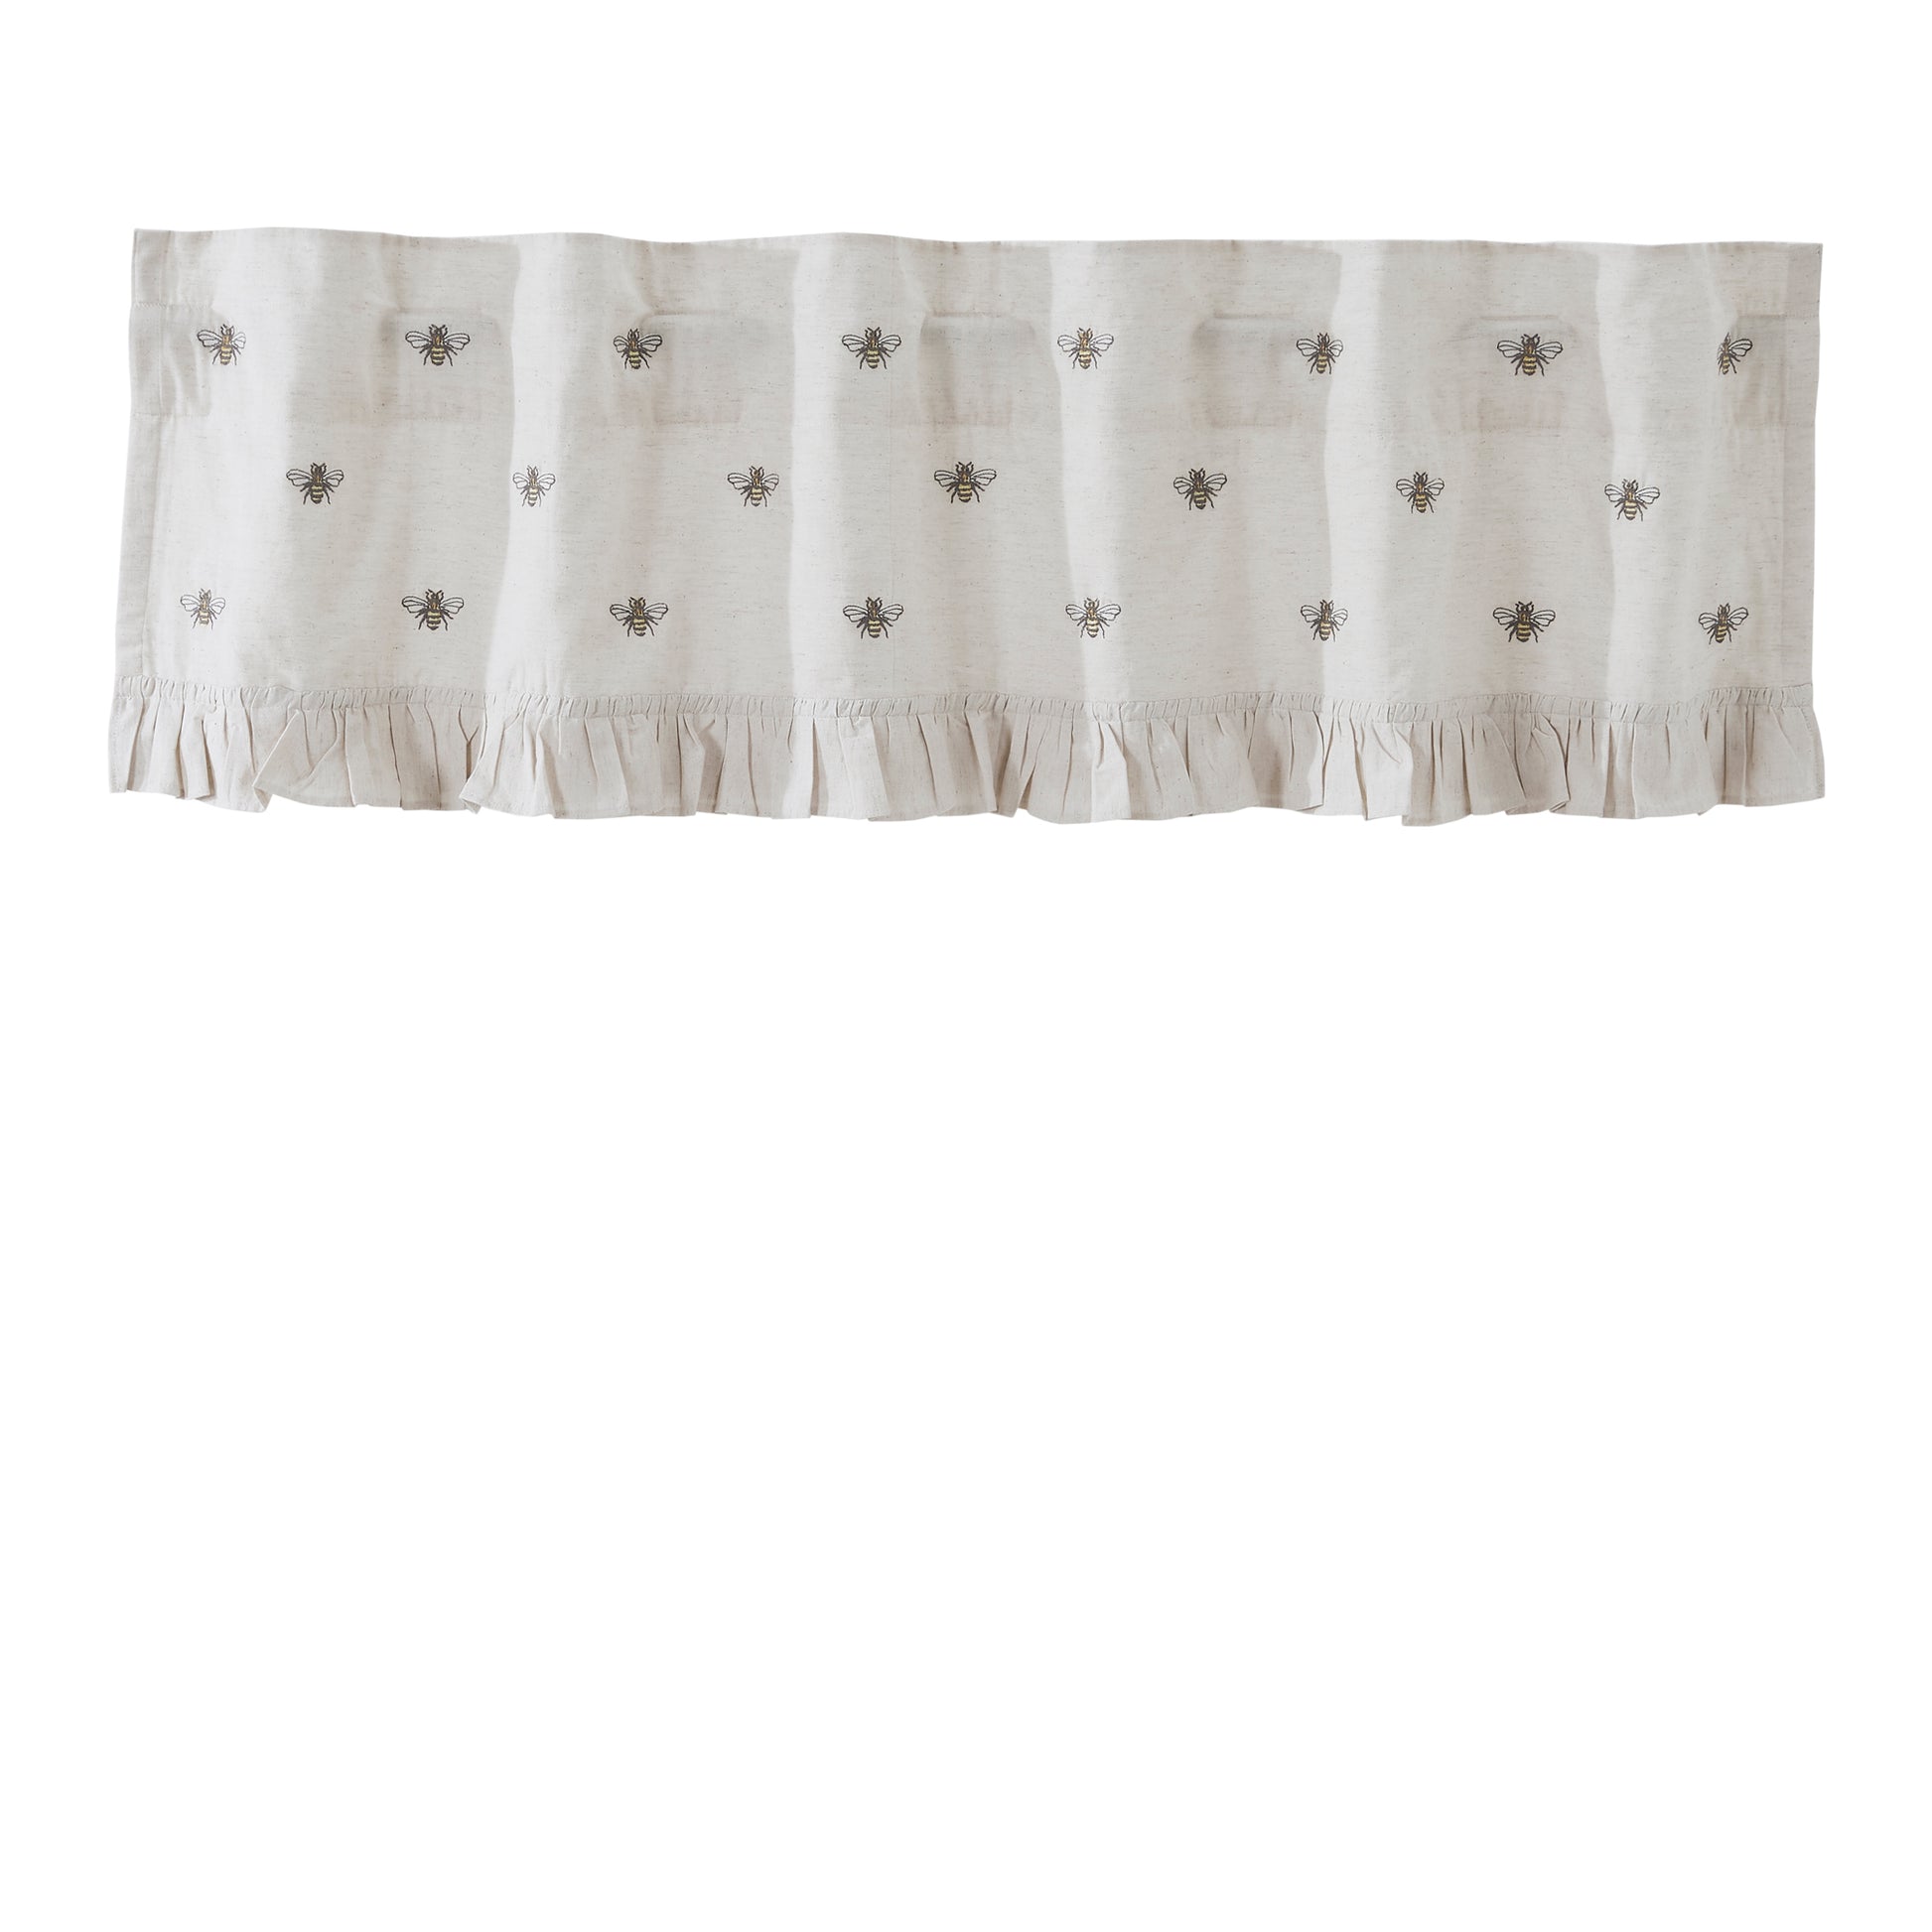 81264-Embroidered-Bee-Valance-16x60-image-7